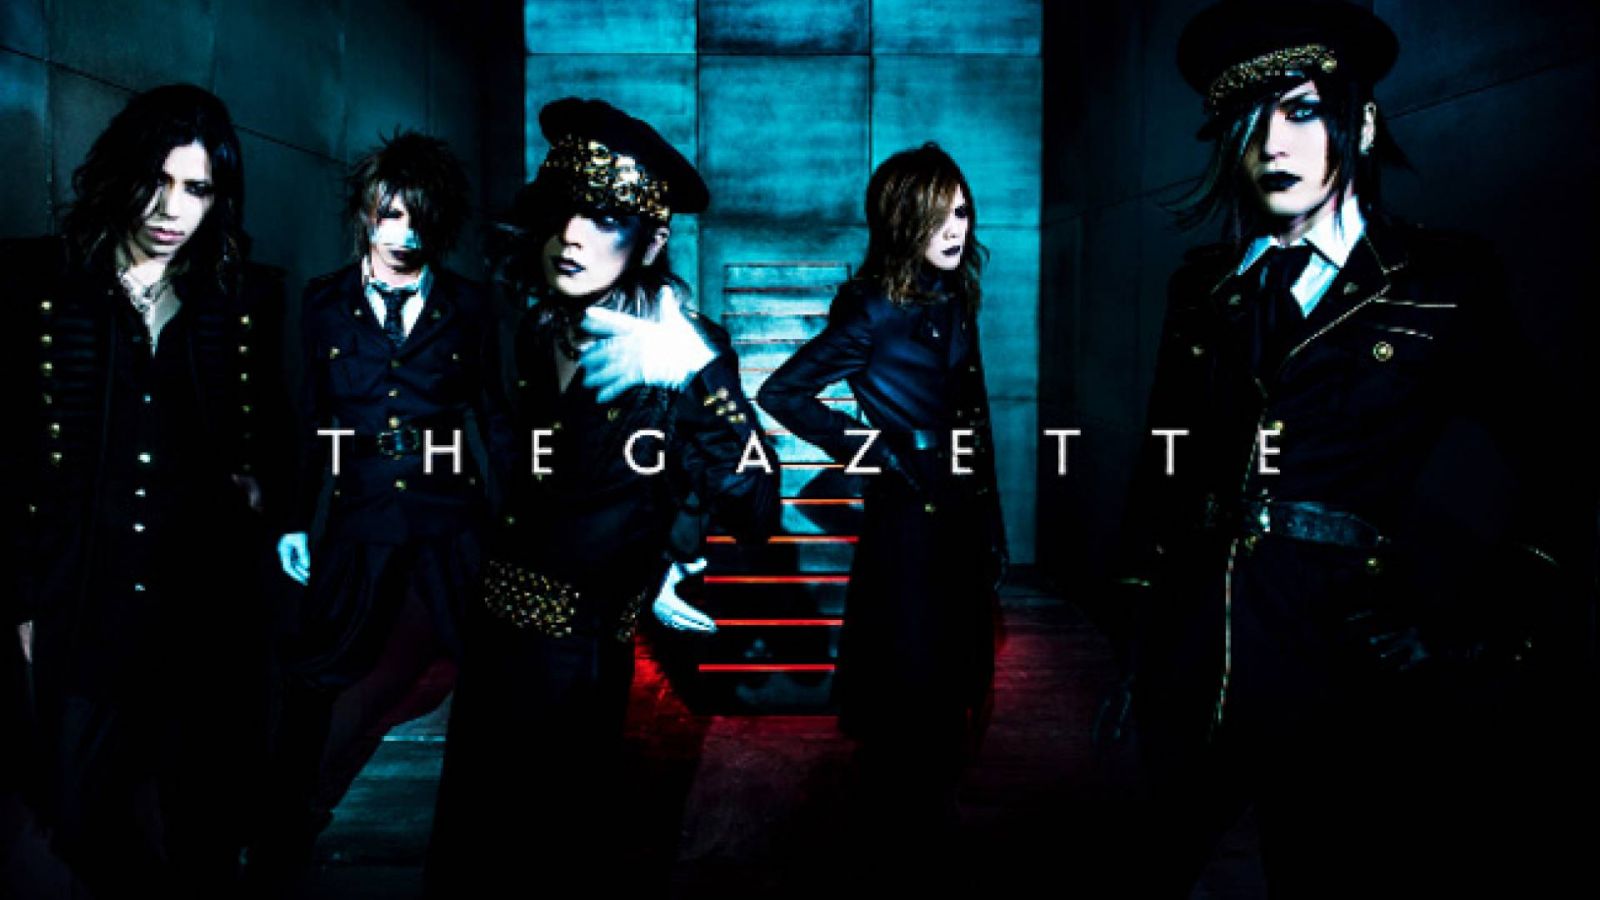 Update on the GazettE's New Album © 2015 PS COMPANY. Provided by JPU Records.